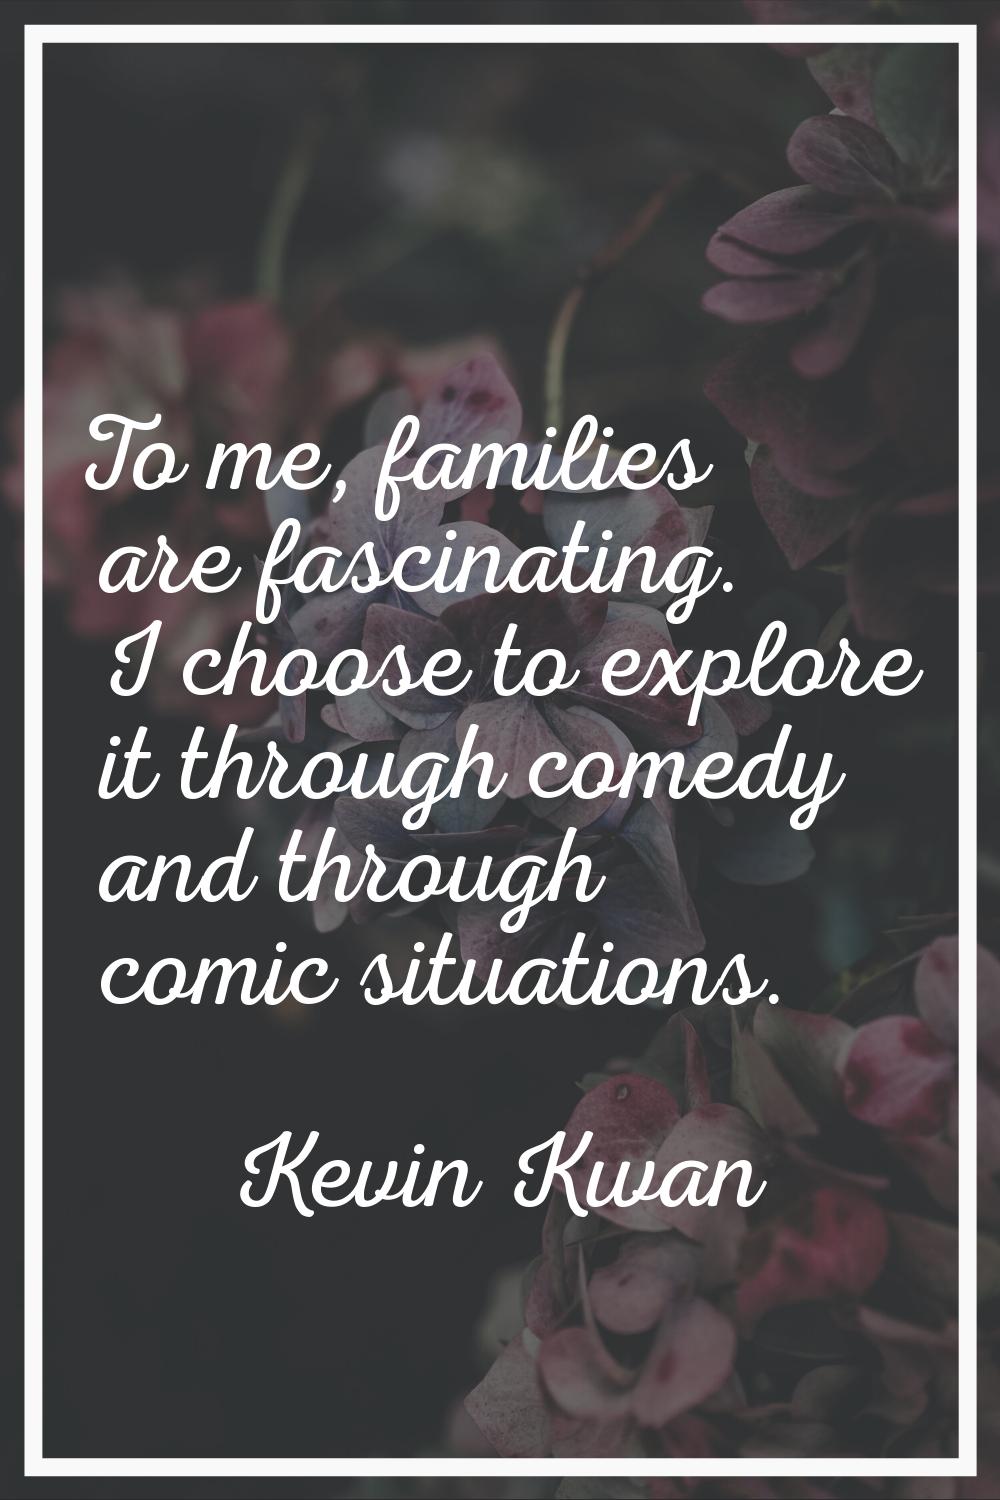 To me, families are fascinating. I choose to explore it through comedy and through comic situations